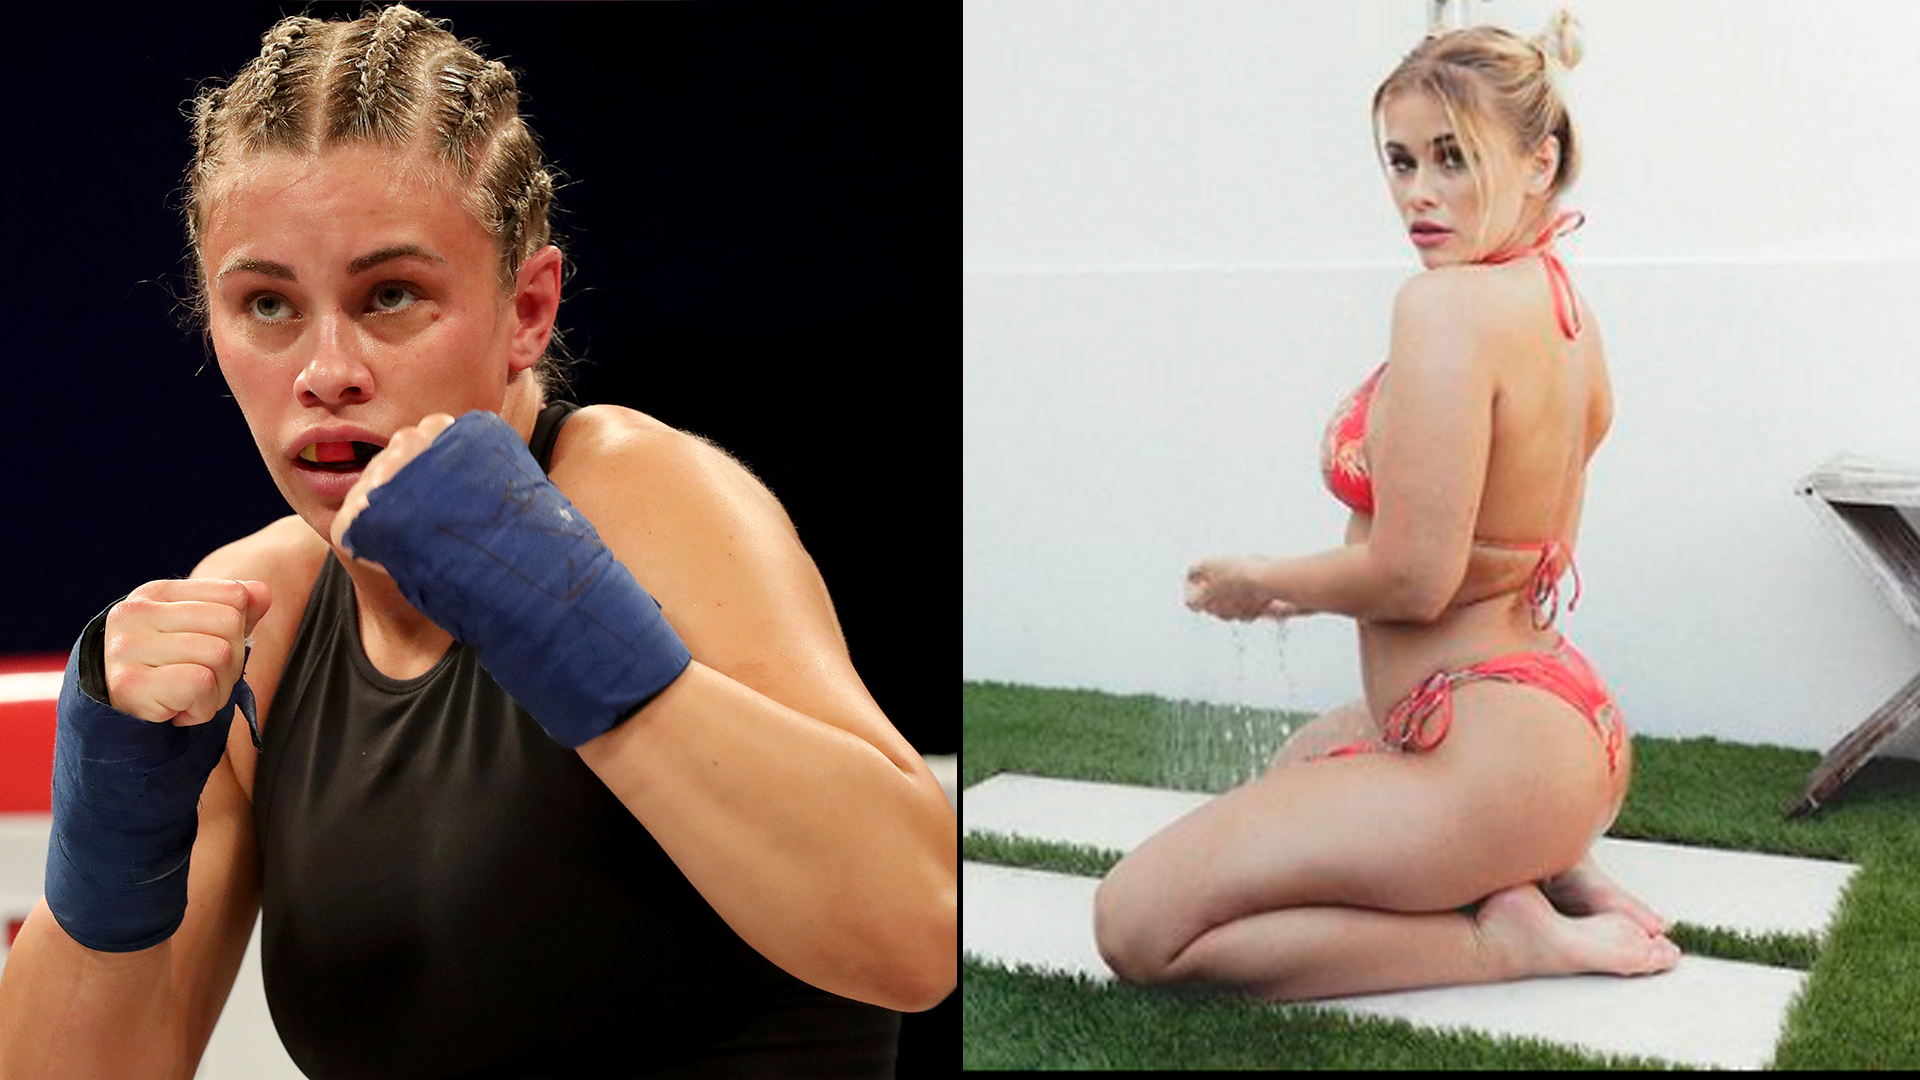 Ronda Sex Video Com - A former UFC star revealed that her life changed after launching her own  erotic content site - Infobae